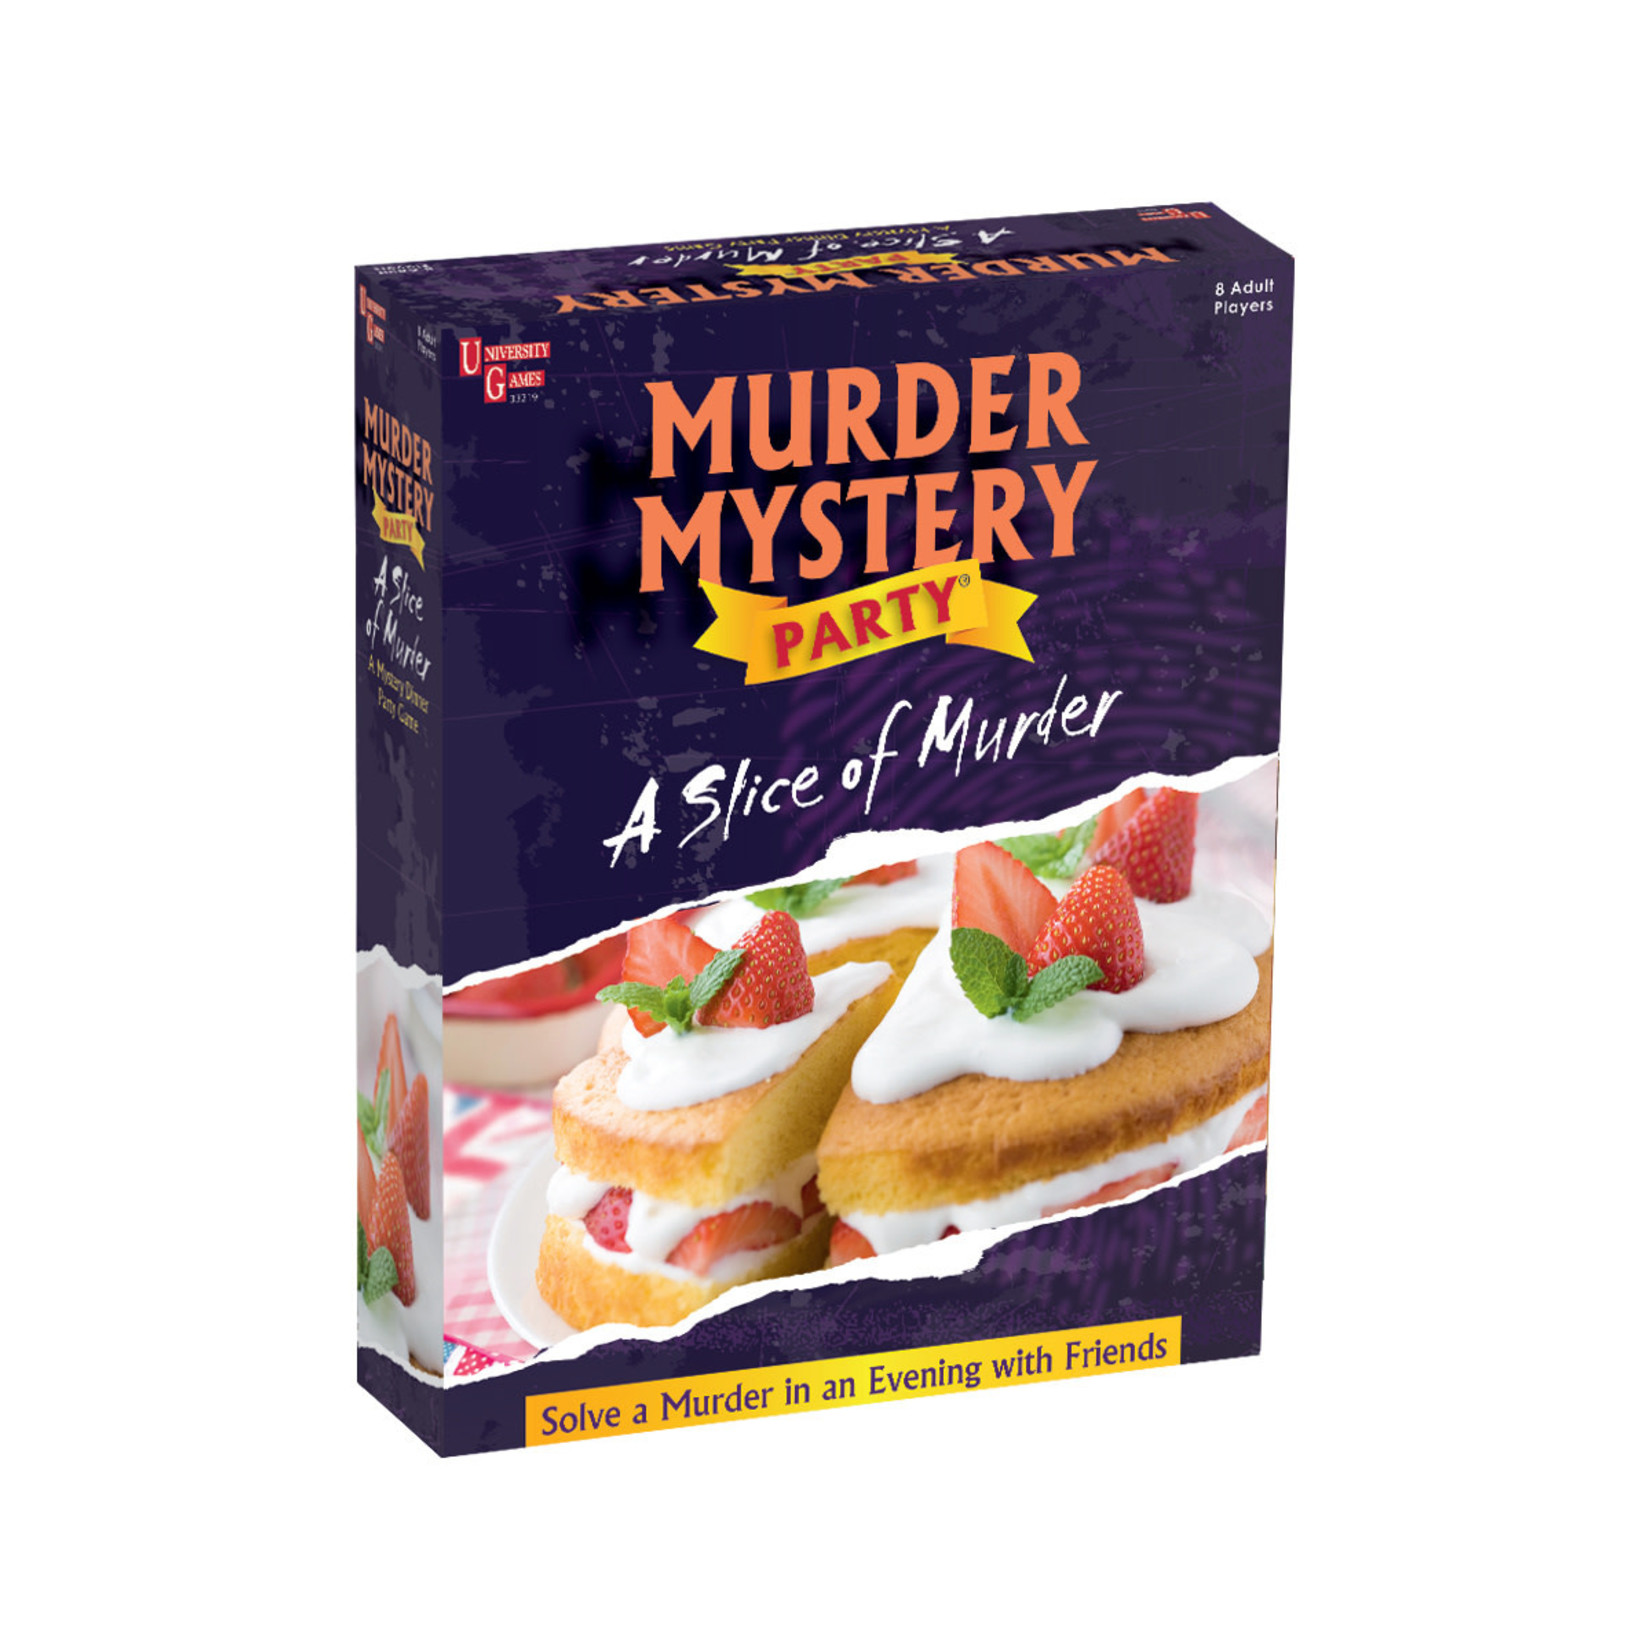 University Games Murder Mystery Party: A Slice of Murder